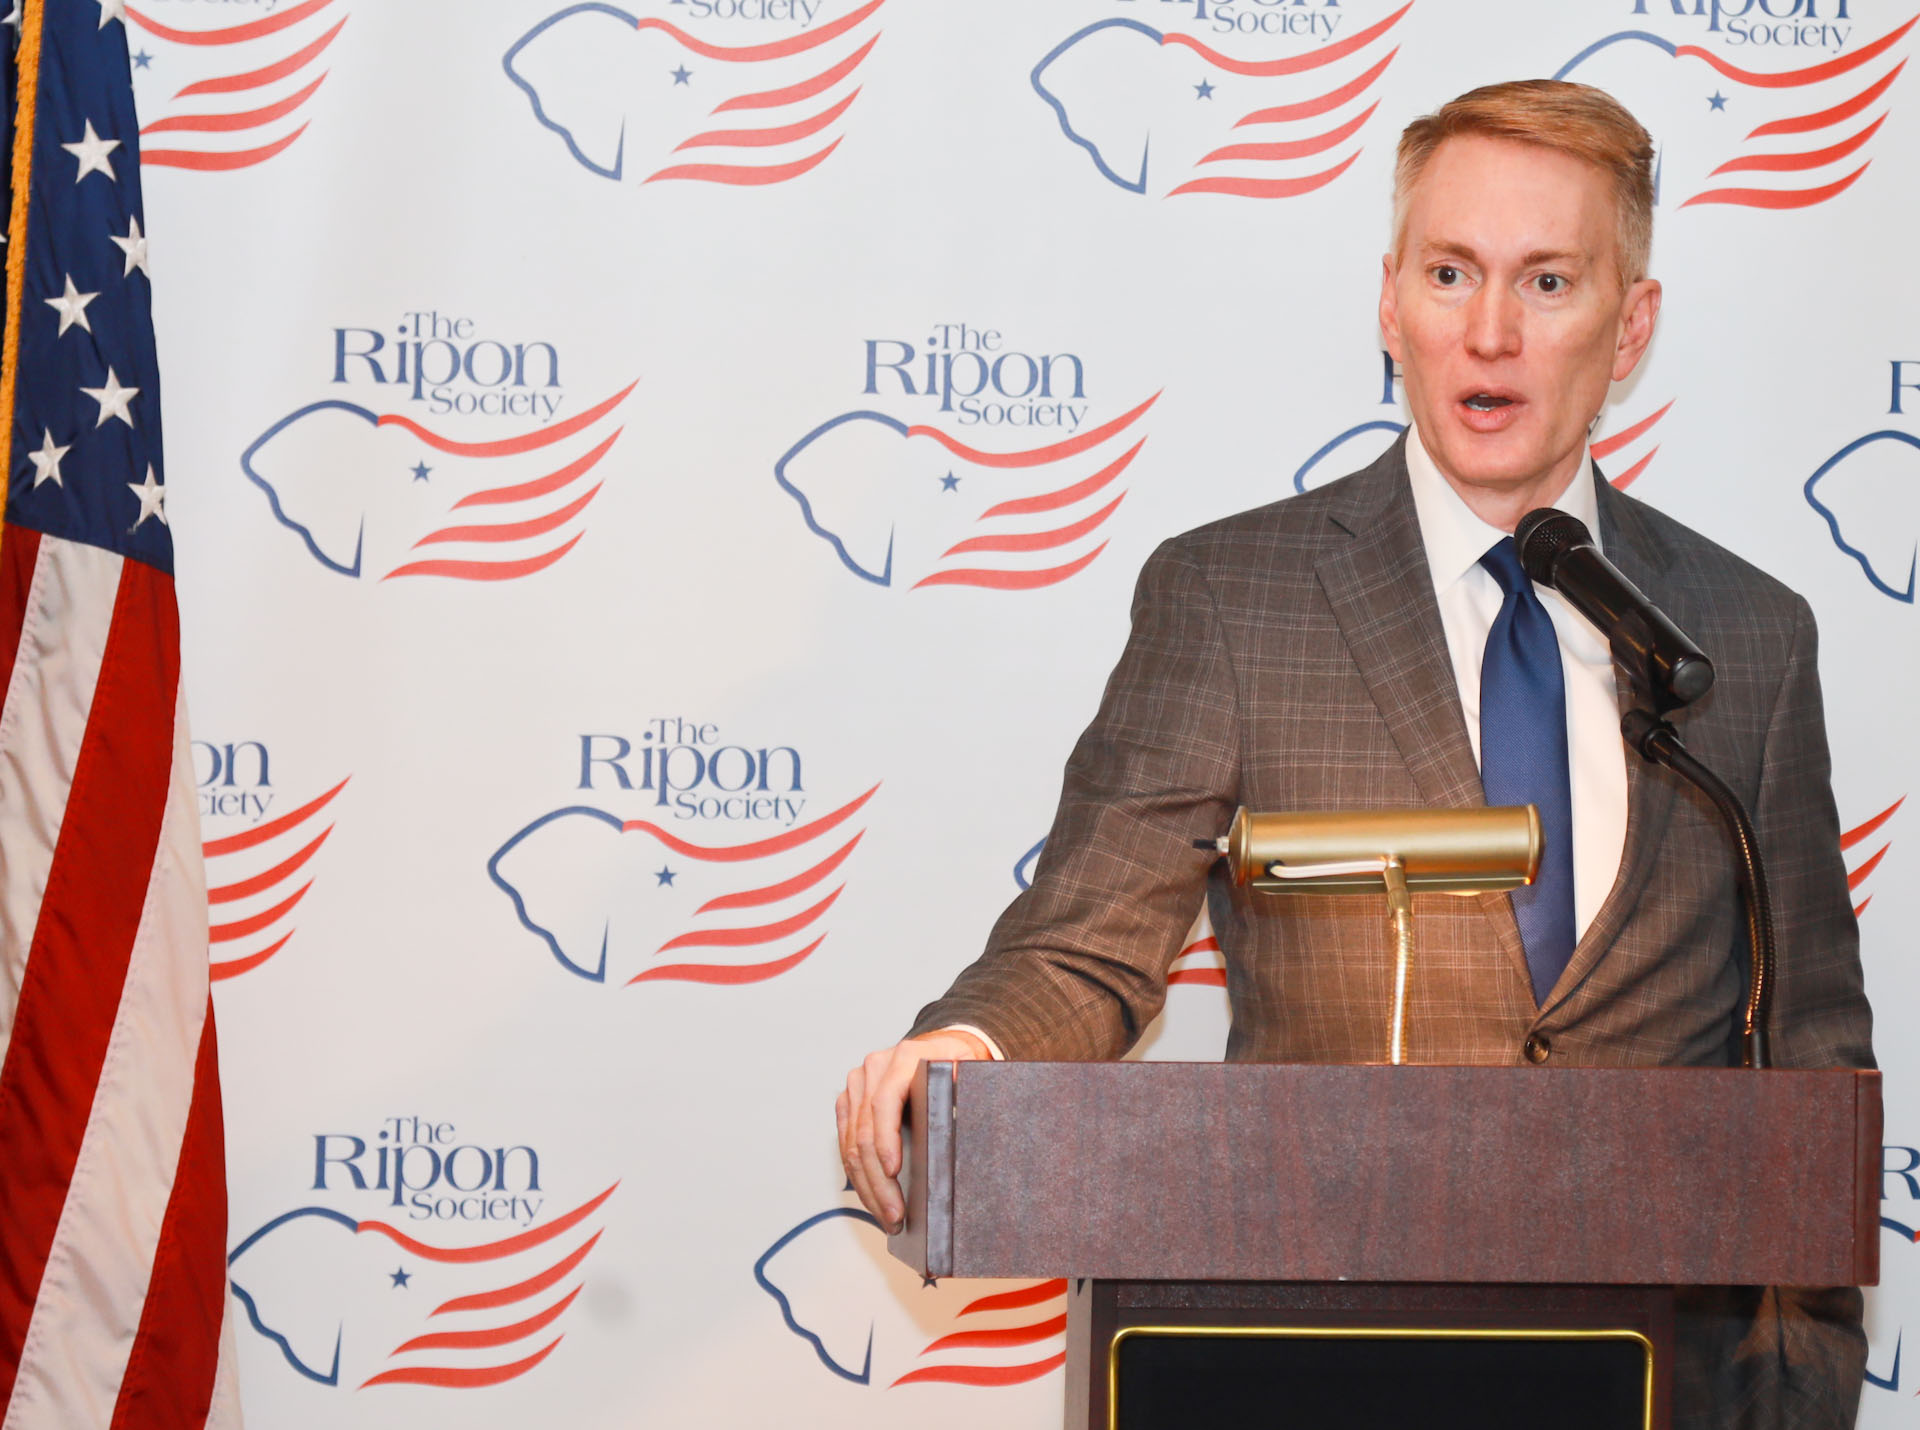 Lankford Leads Effort to Address Border Crisis, Saying It’s a Matter of National Security